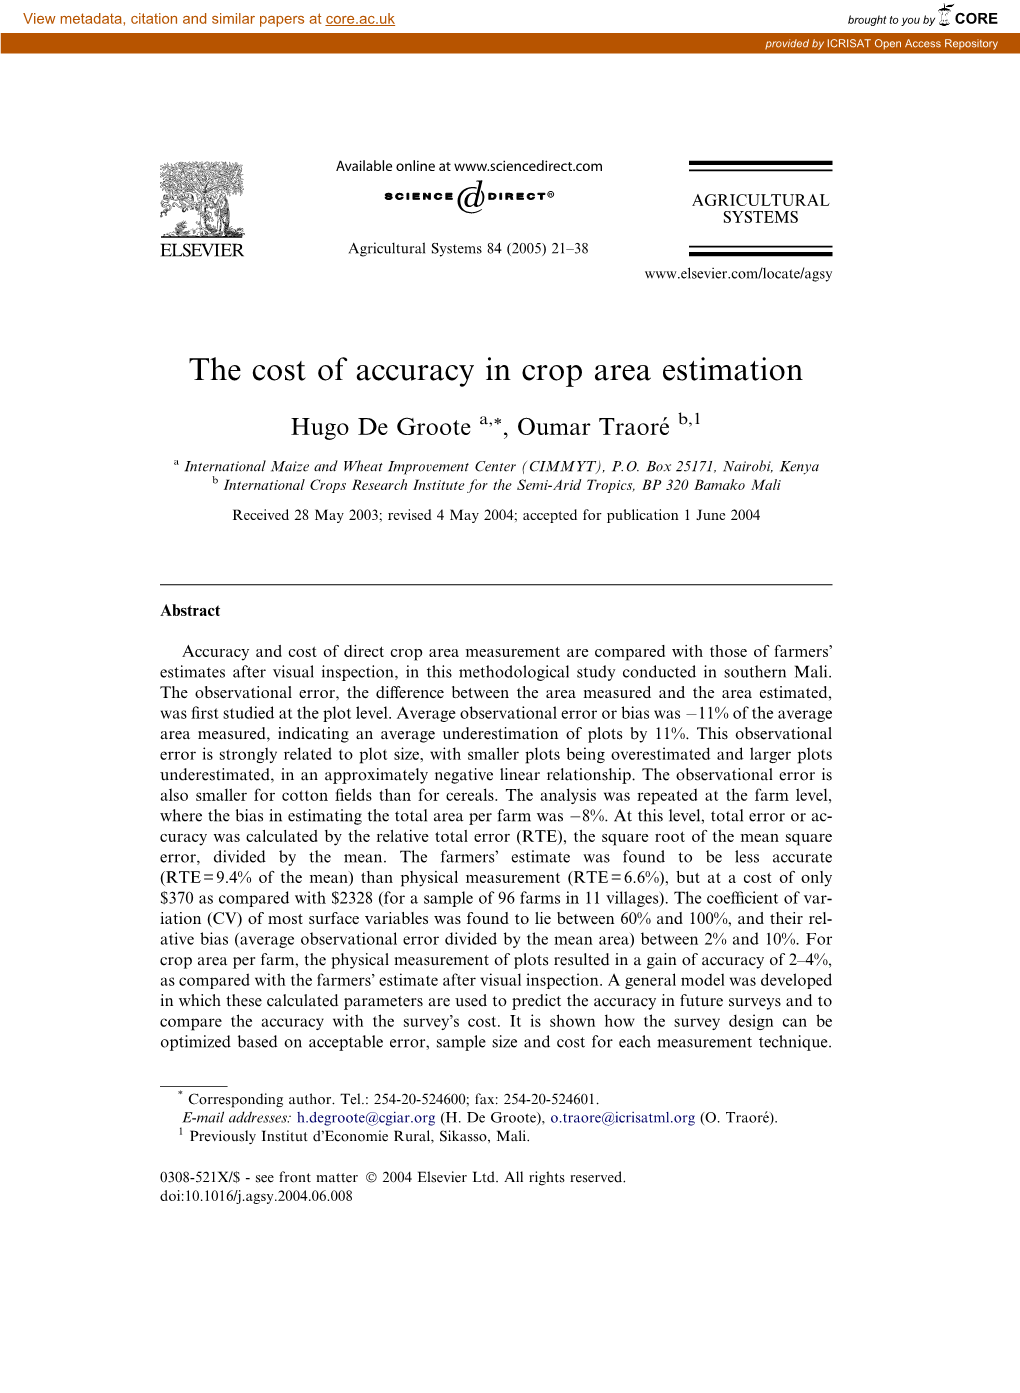 The Cost of Accuracy in Crop Area Estimation